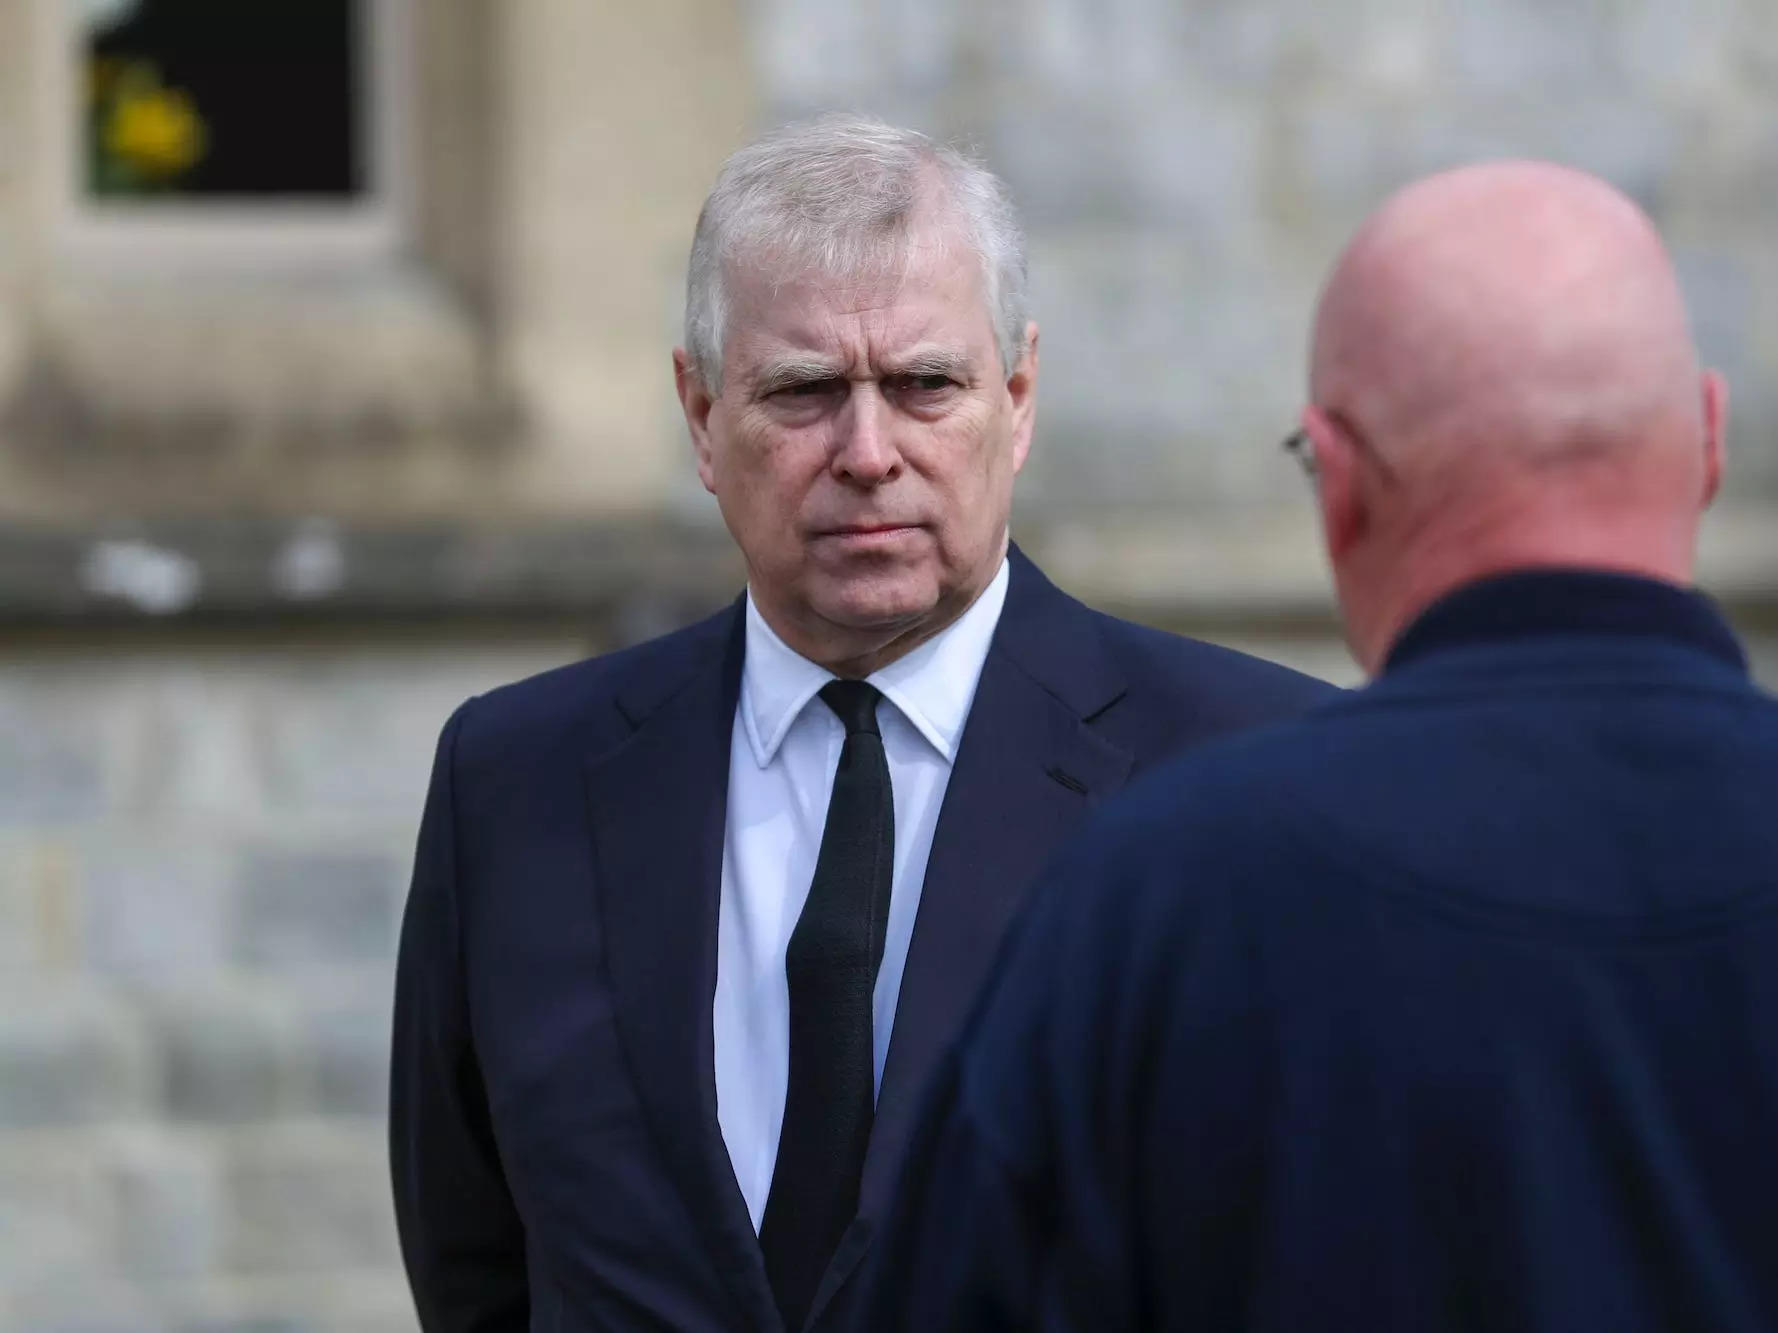 Prince Andrew used his stripped royal title in a now-deleted Instagram post shared on his ex-wife's account